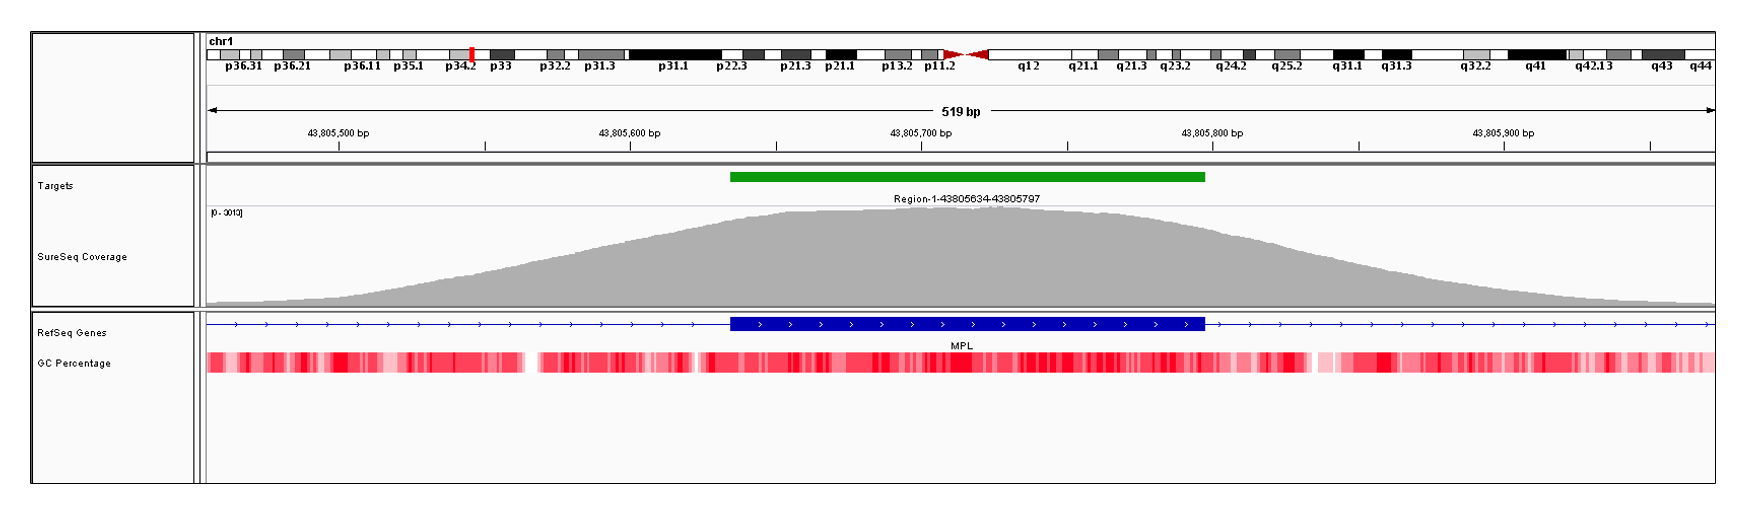 MPL Exon 5 (hg19 chr1:43805635-43805797). Depth of coverage per base (grey). Targeted region (green). Gene coding region as defined by RefSeq (blue). GC percentage (red). Image